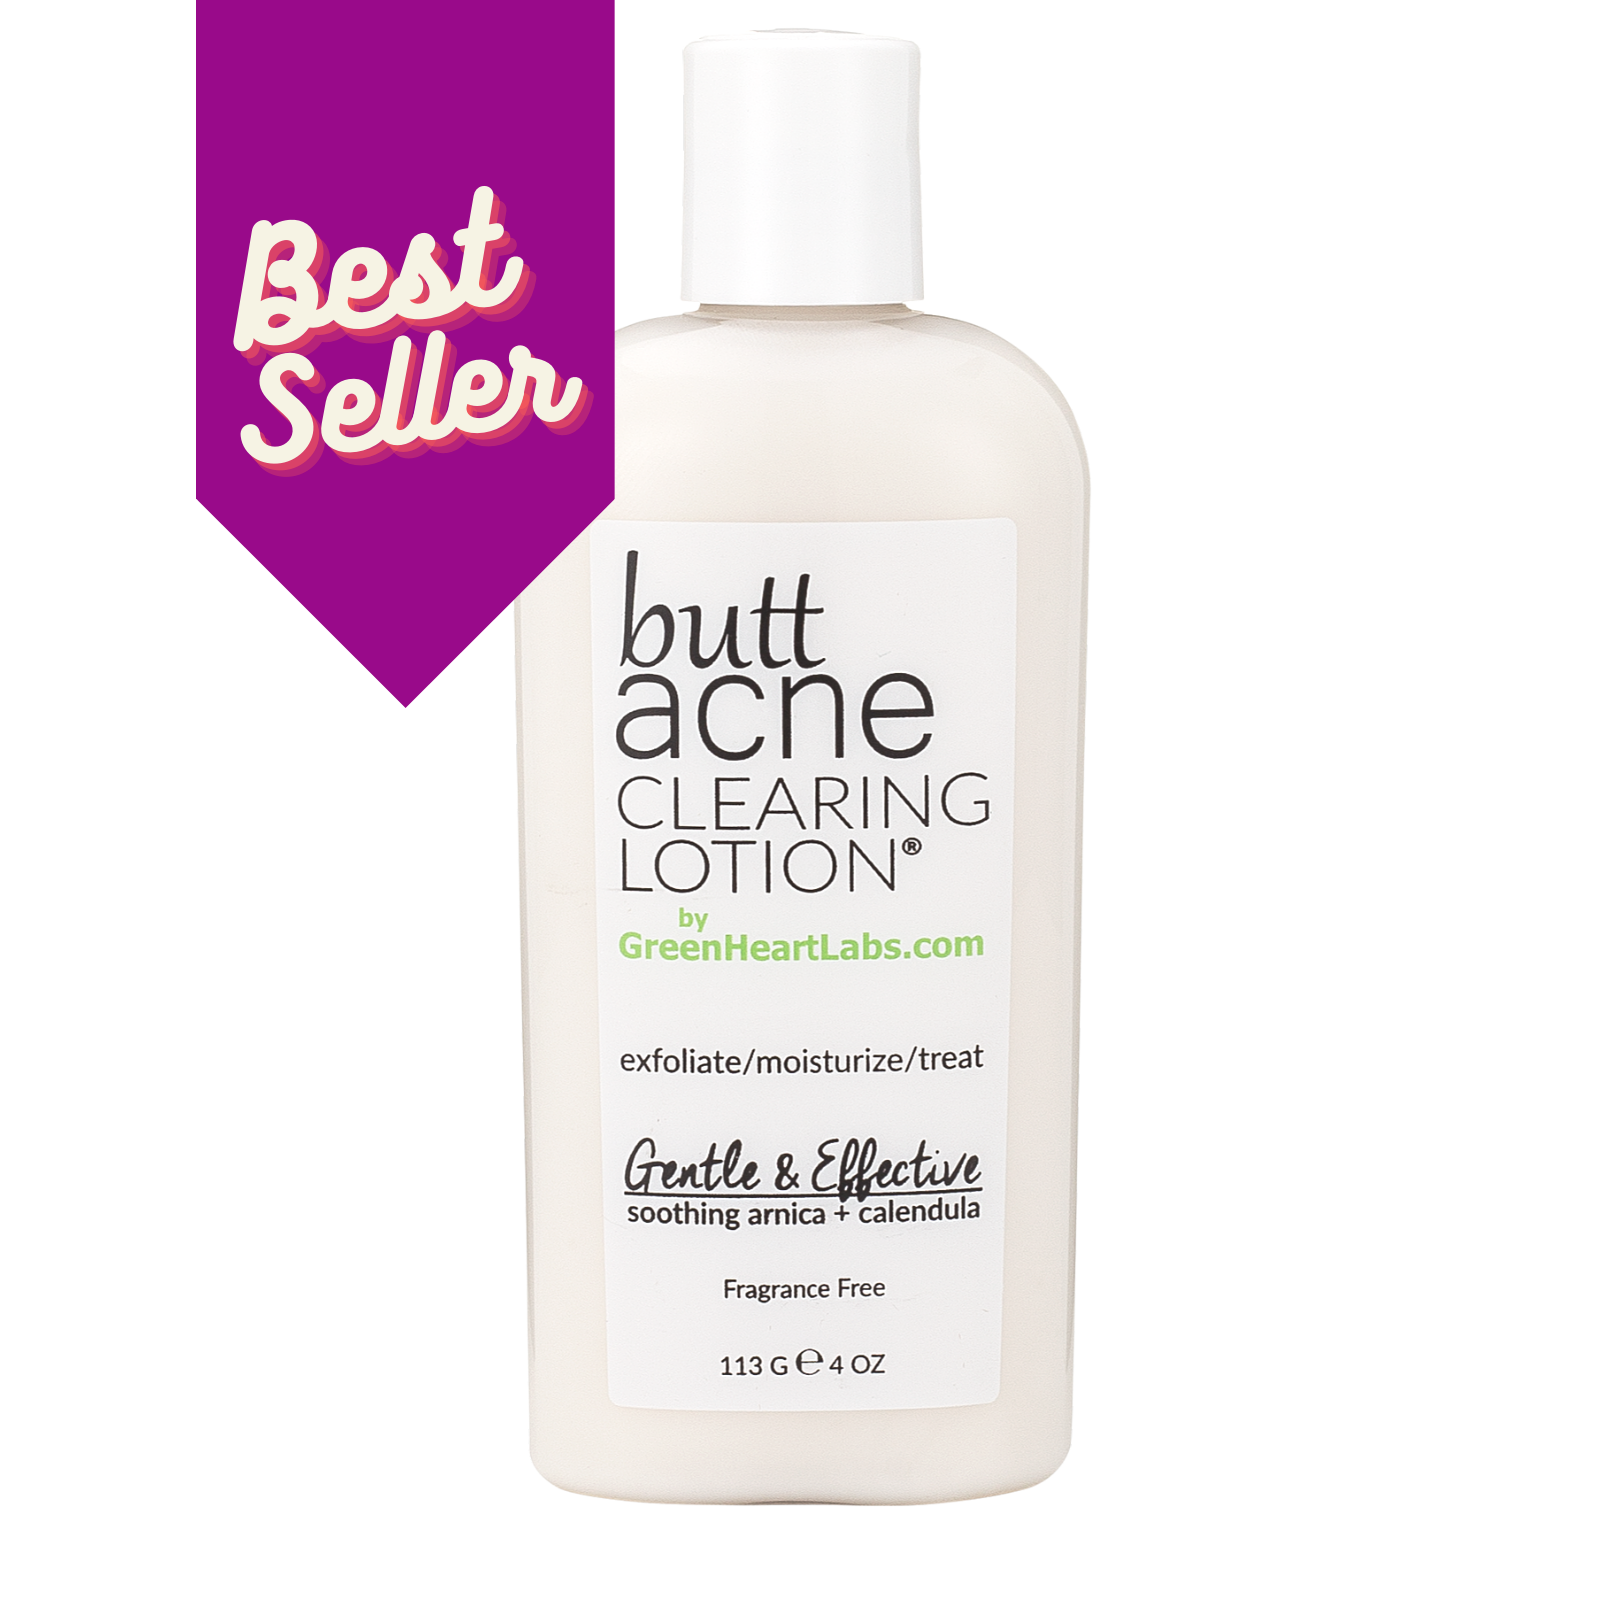 Butt Acne Clearing Lotion for Body